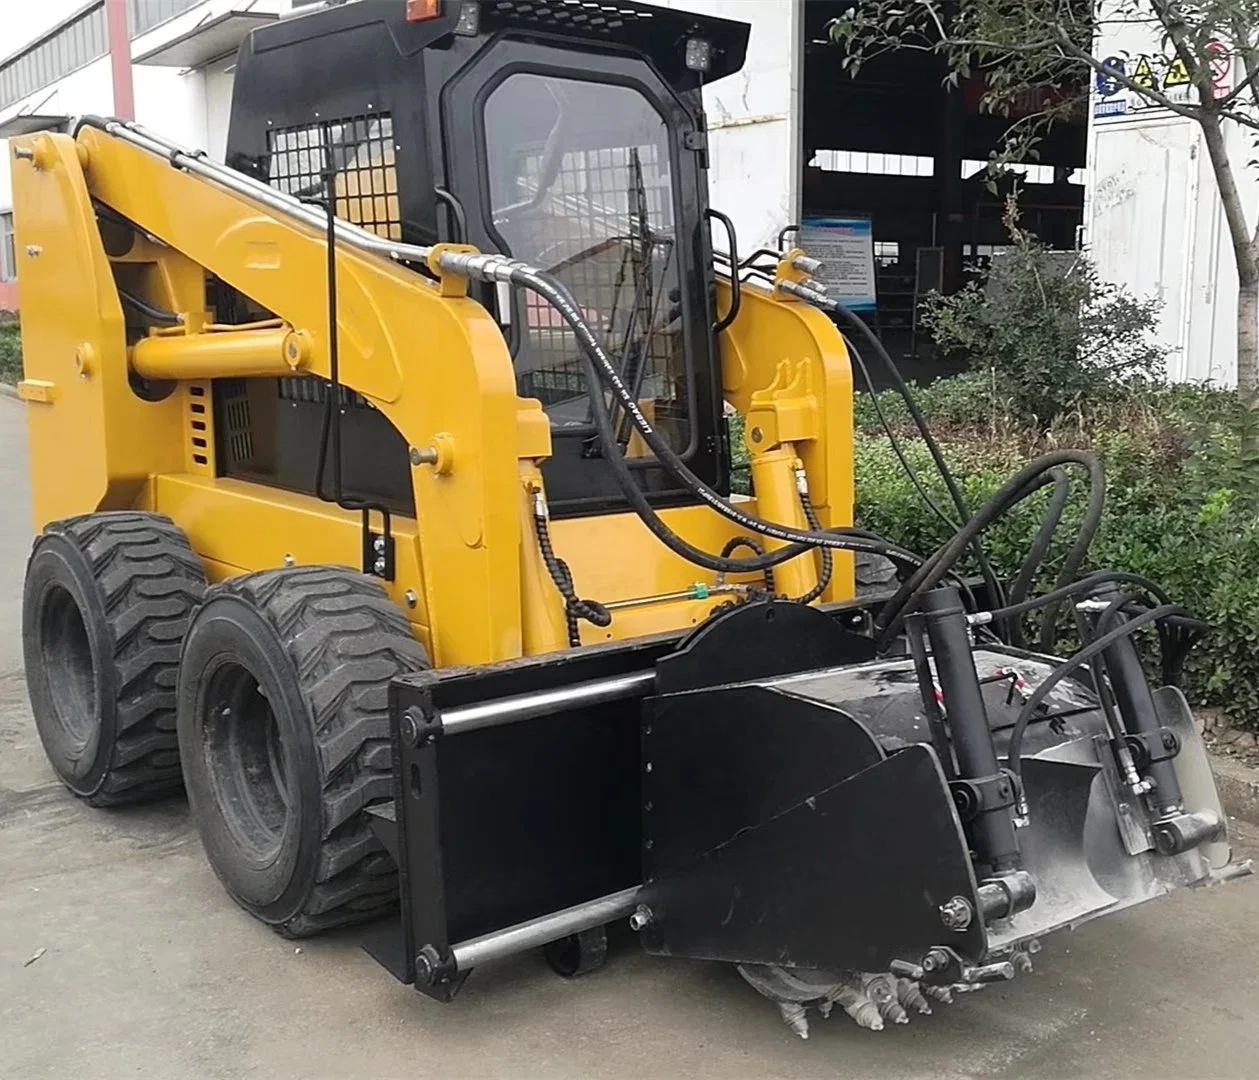 New 100HP High Flow Skid Steer Loader with Planer Skid Steer with Asphalt Cutting Attachment